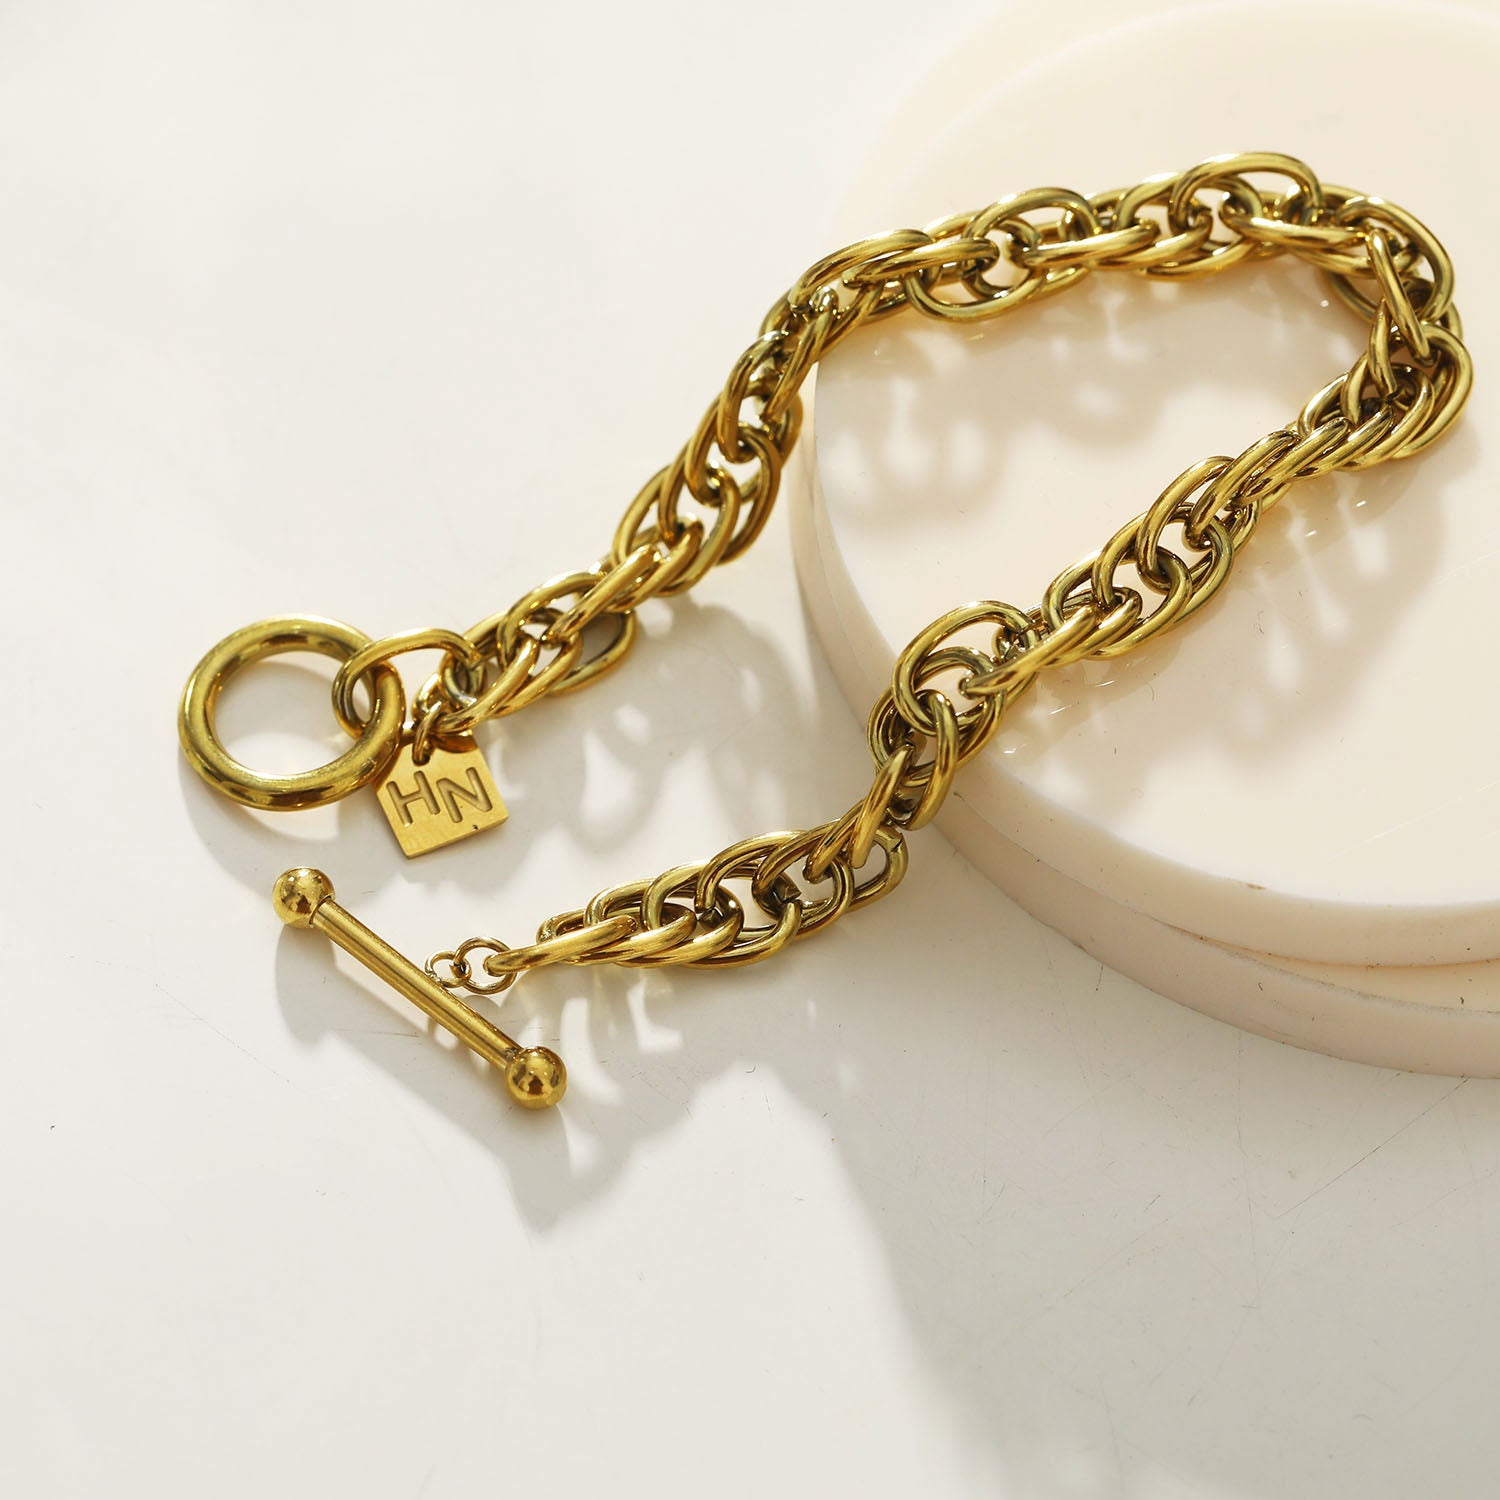 Compare prices for Chain Links Patches Bracelet (MP2449) in official stores